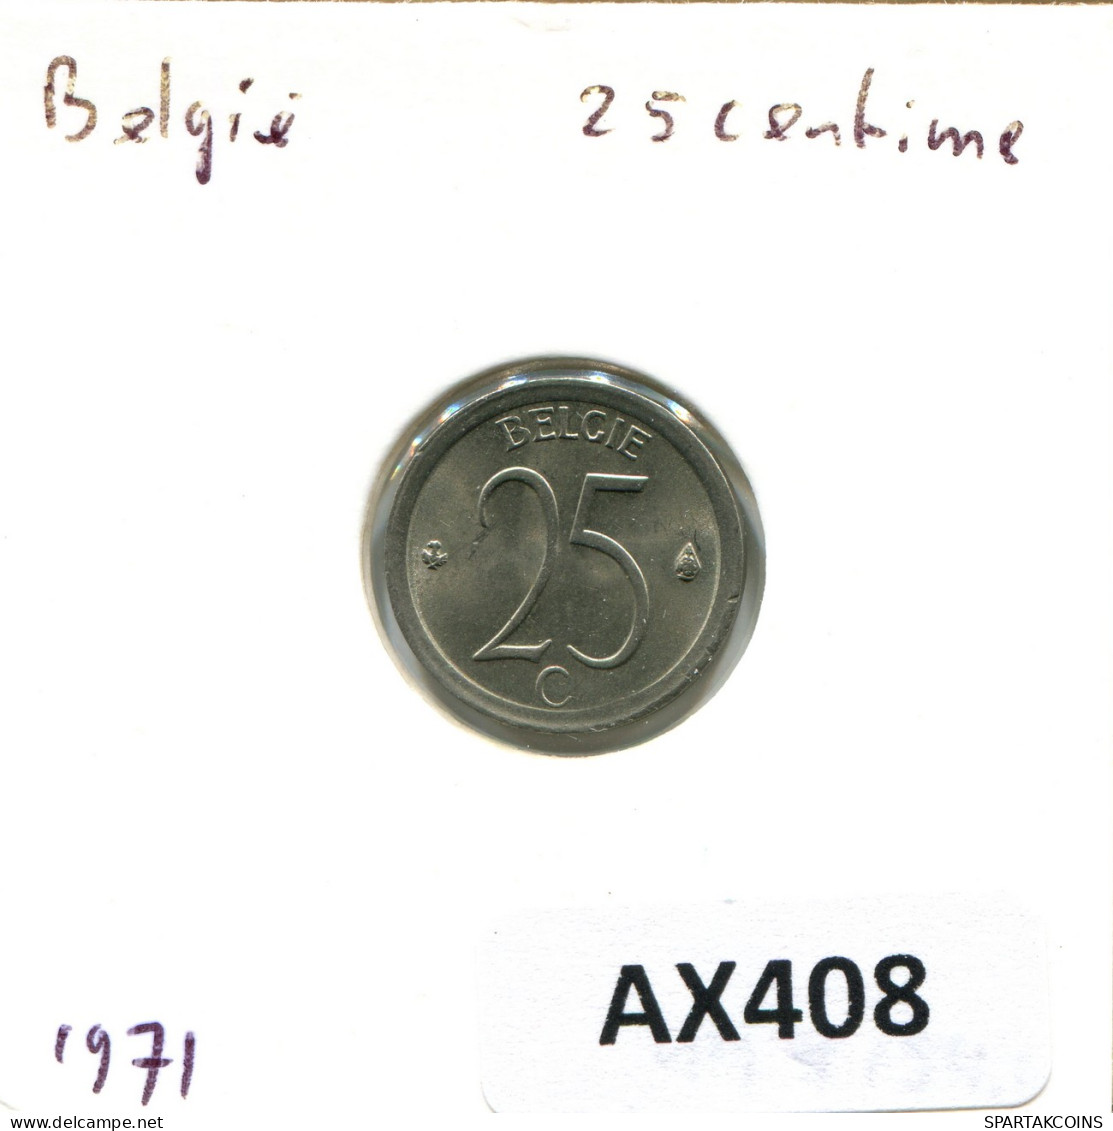 25 CENTIMES 1971 FRENCH Text BELGIUM Coin #AX408.U - 25 Cents